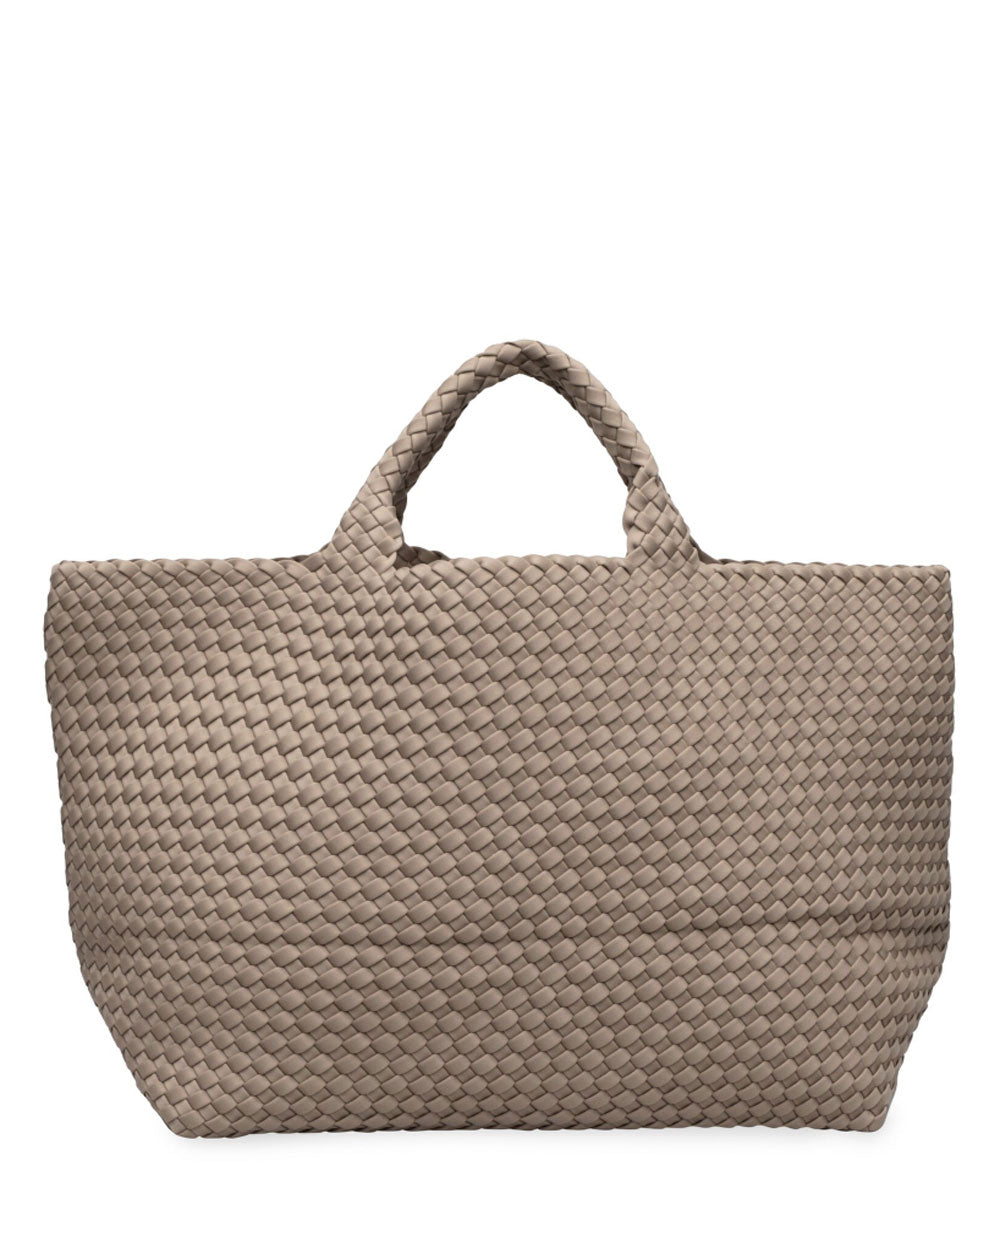 St. Barths Large Tote in Cashmere